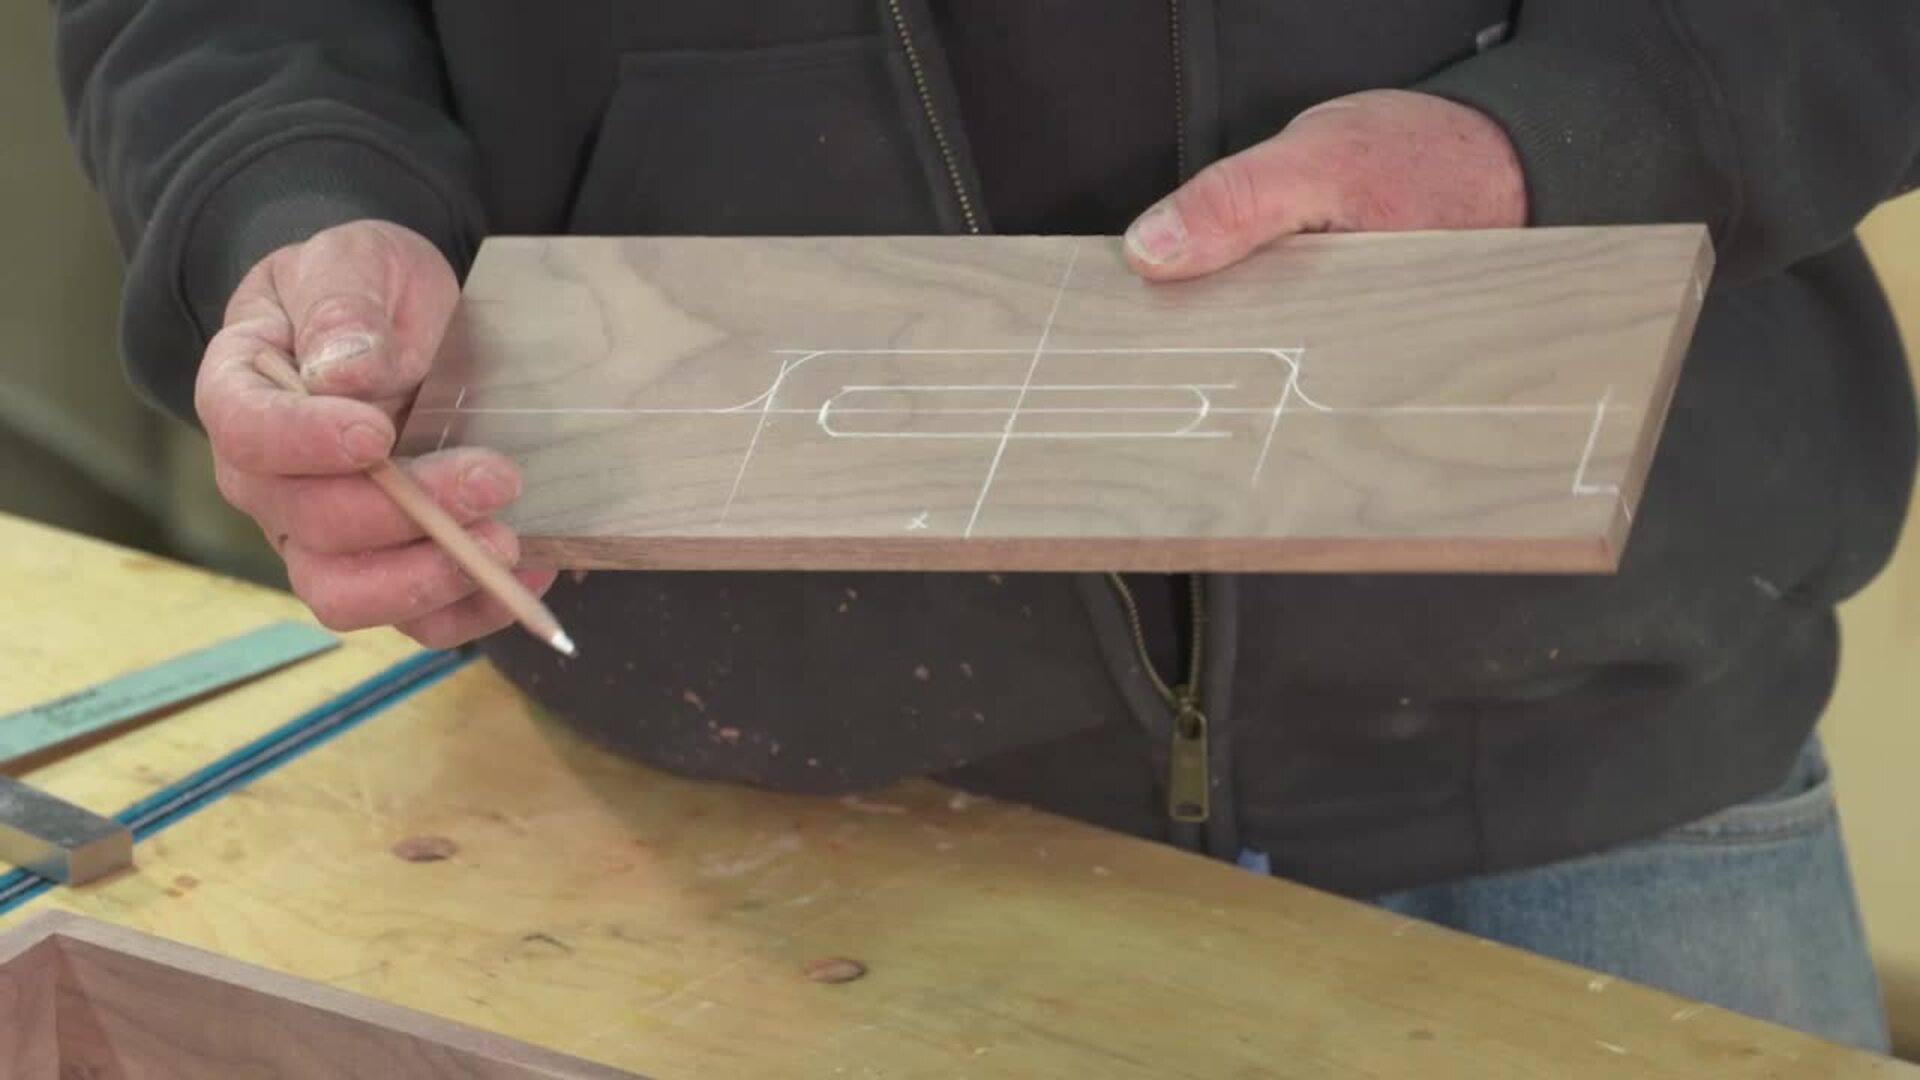 Design, Cut, and Assemble the Tray